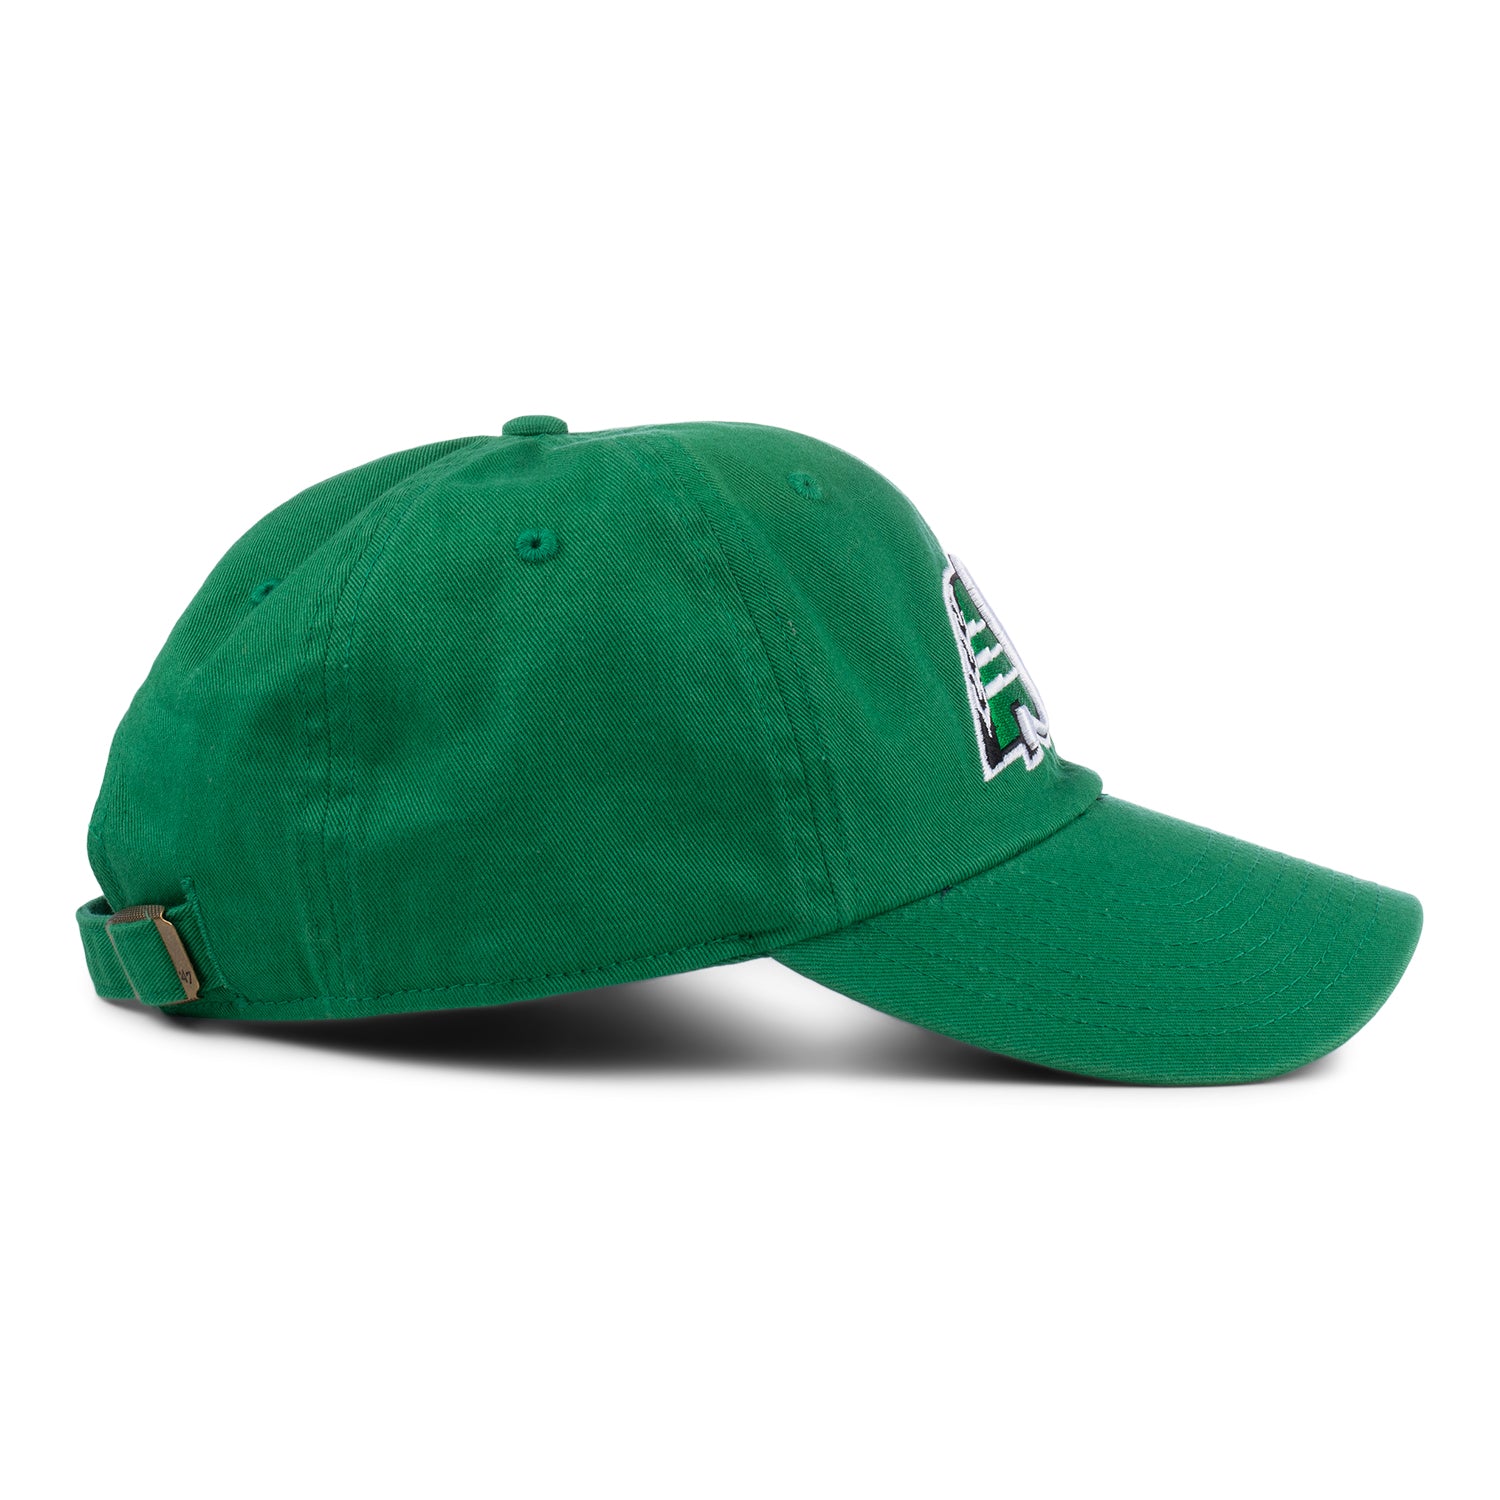 Youth 47 Clean Up Cap Green